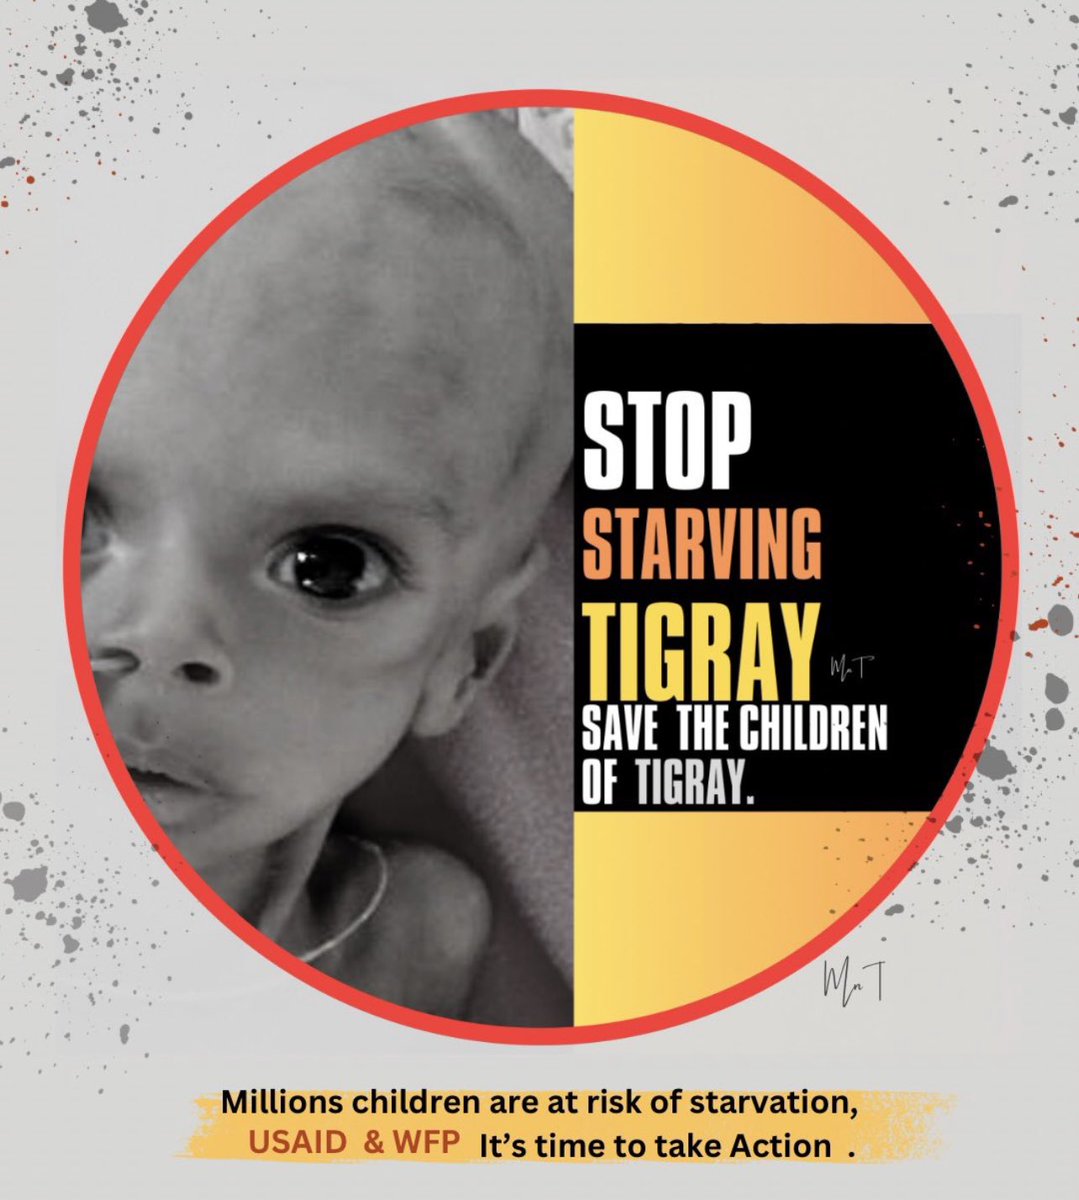 🗣Civilians are steadily dying from an engineered famine. @WFP & @USAID we demand ACTION,the suspension of humanitarian aid to #Tigray is currently threatening millions of lives. #ResumeAid4Tigray #BringBackTigrayRefugees @PowerUSAID @WFP_Africa @ICRC @SecBlinken @TDF1254